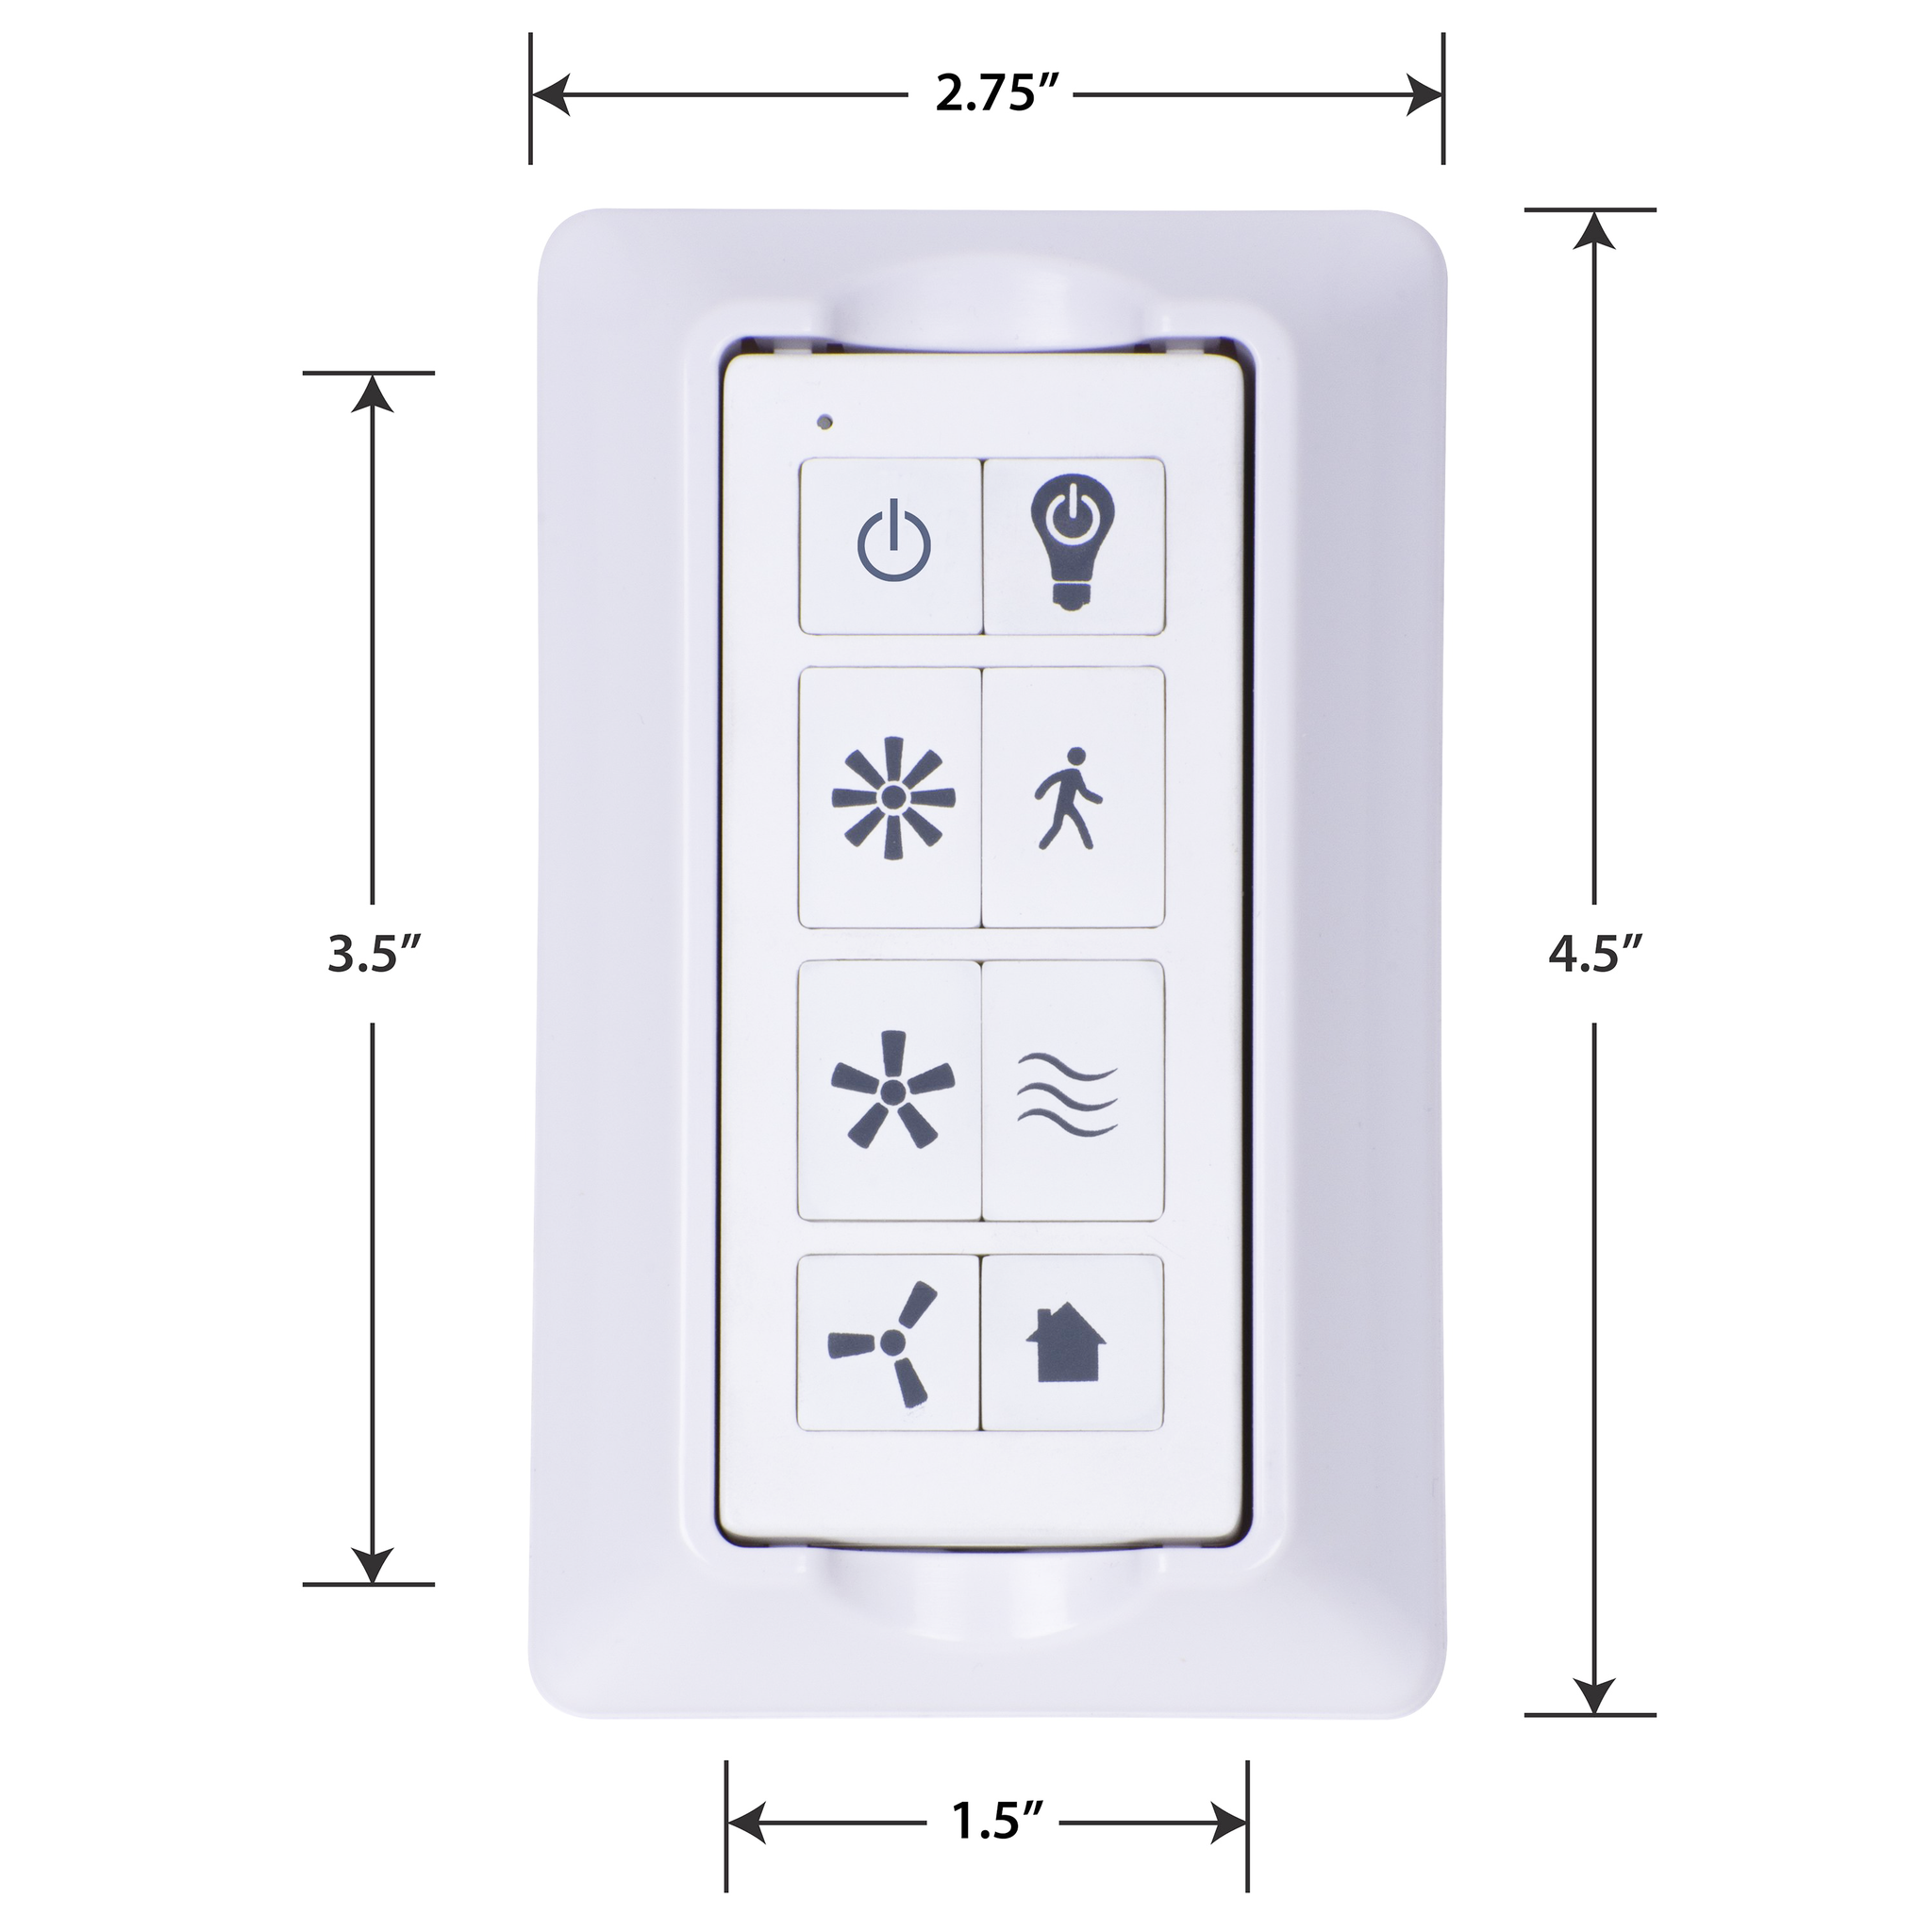 Universal Ceiling Fan Remote Control Kit with Wall Mount, White by Prominence Home